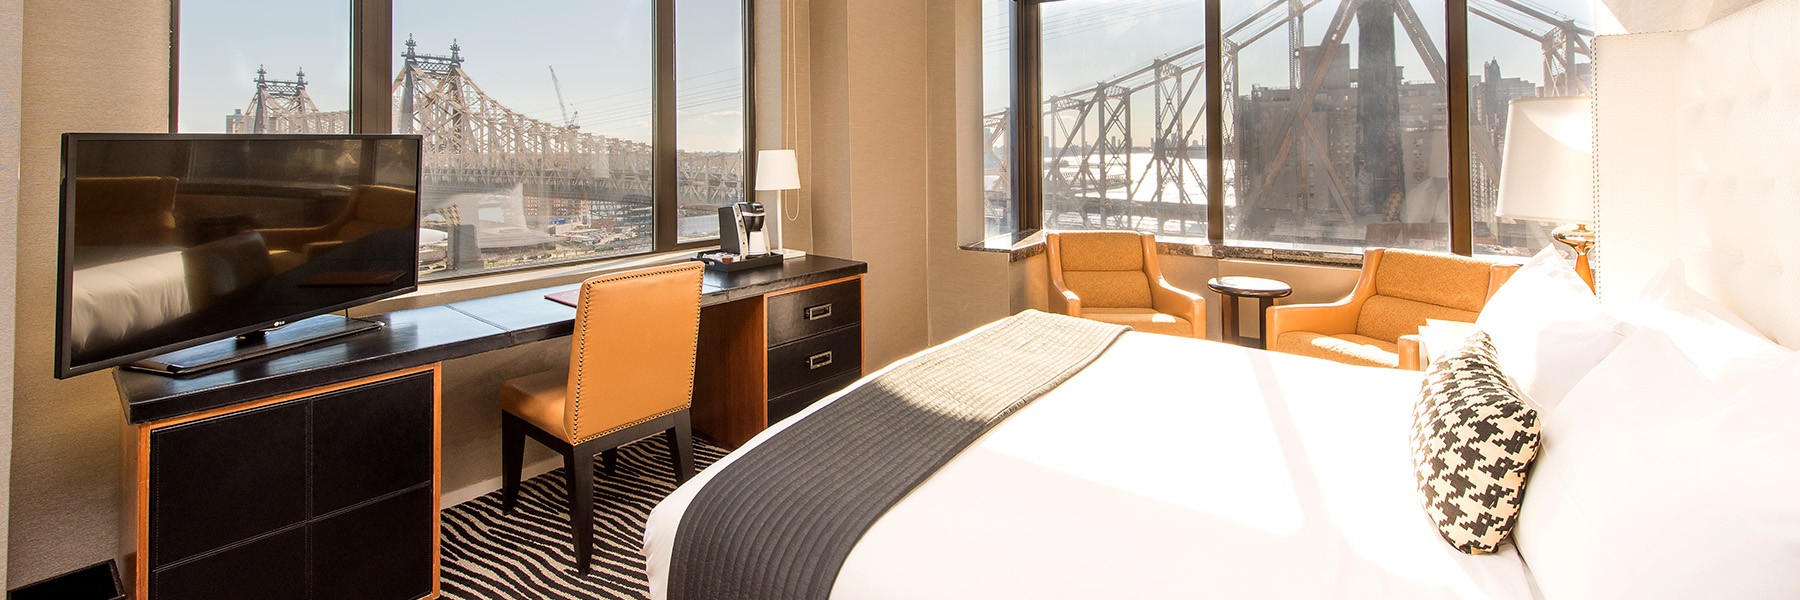 Stay Longer, Save More Offer at Bentley Hotel NYC